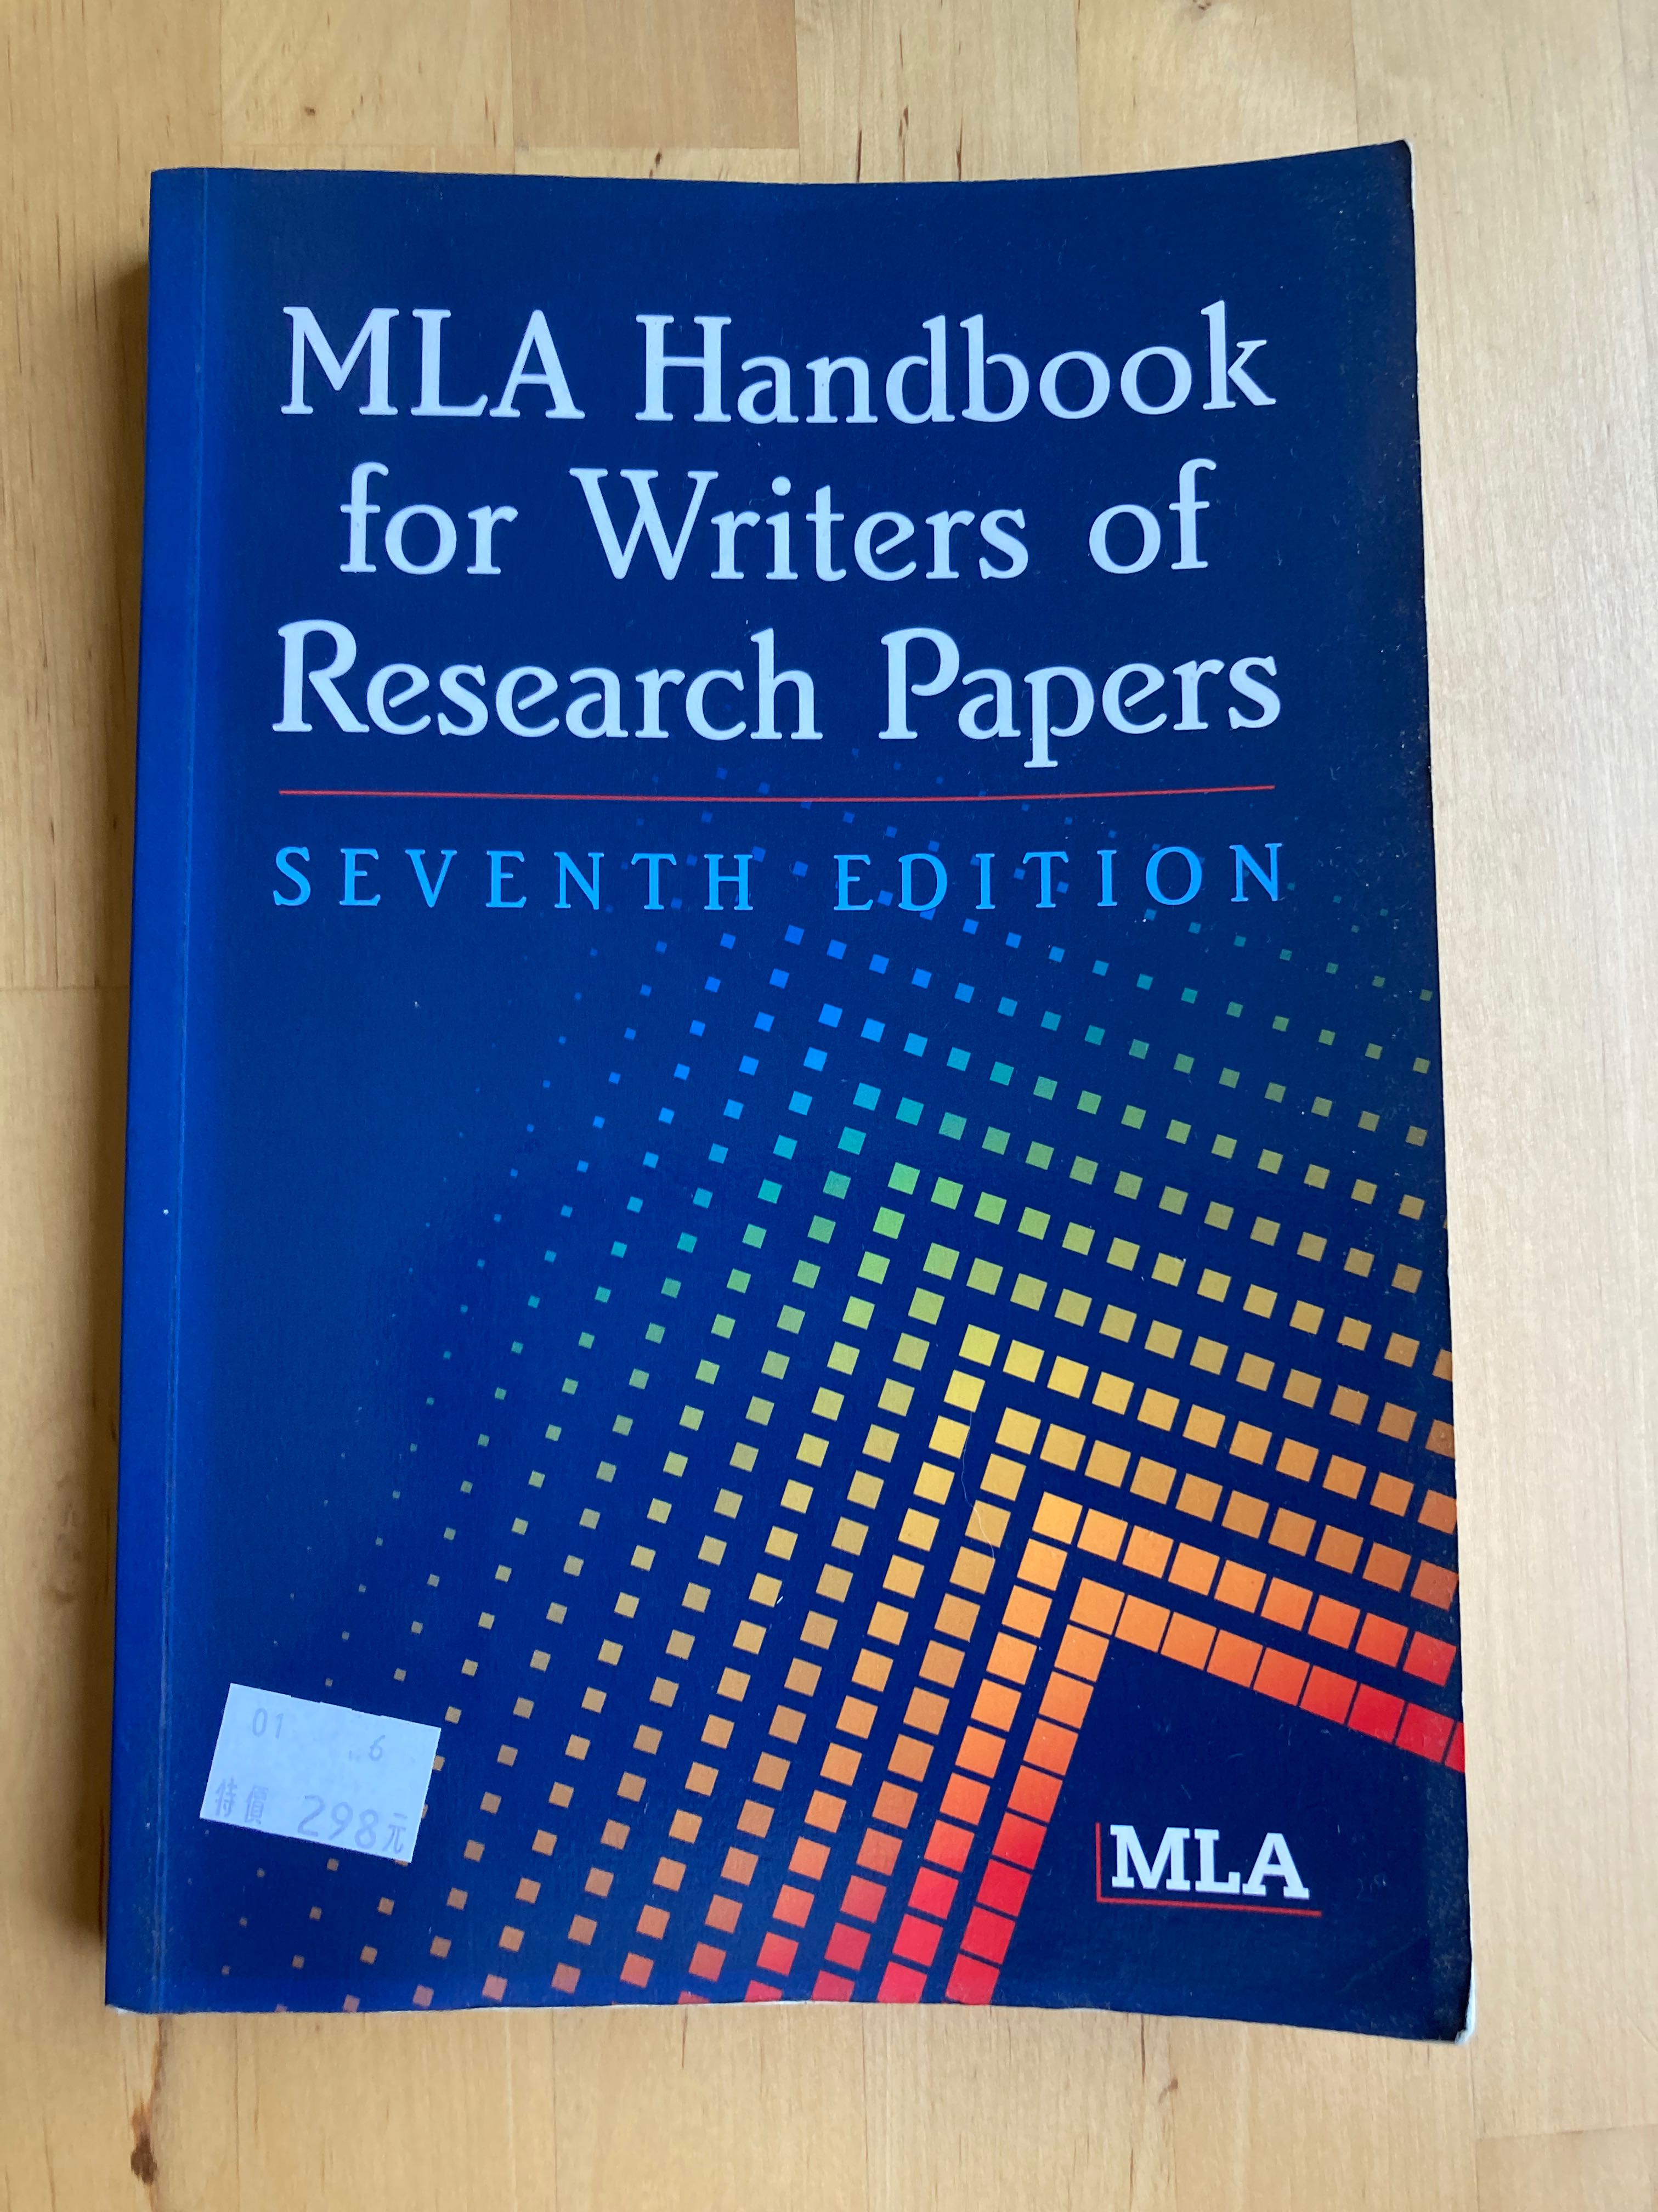 mla handbook for writers of research papers 9th edition